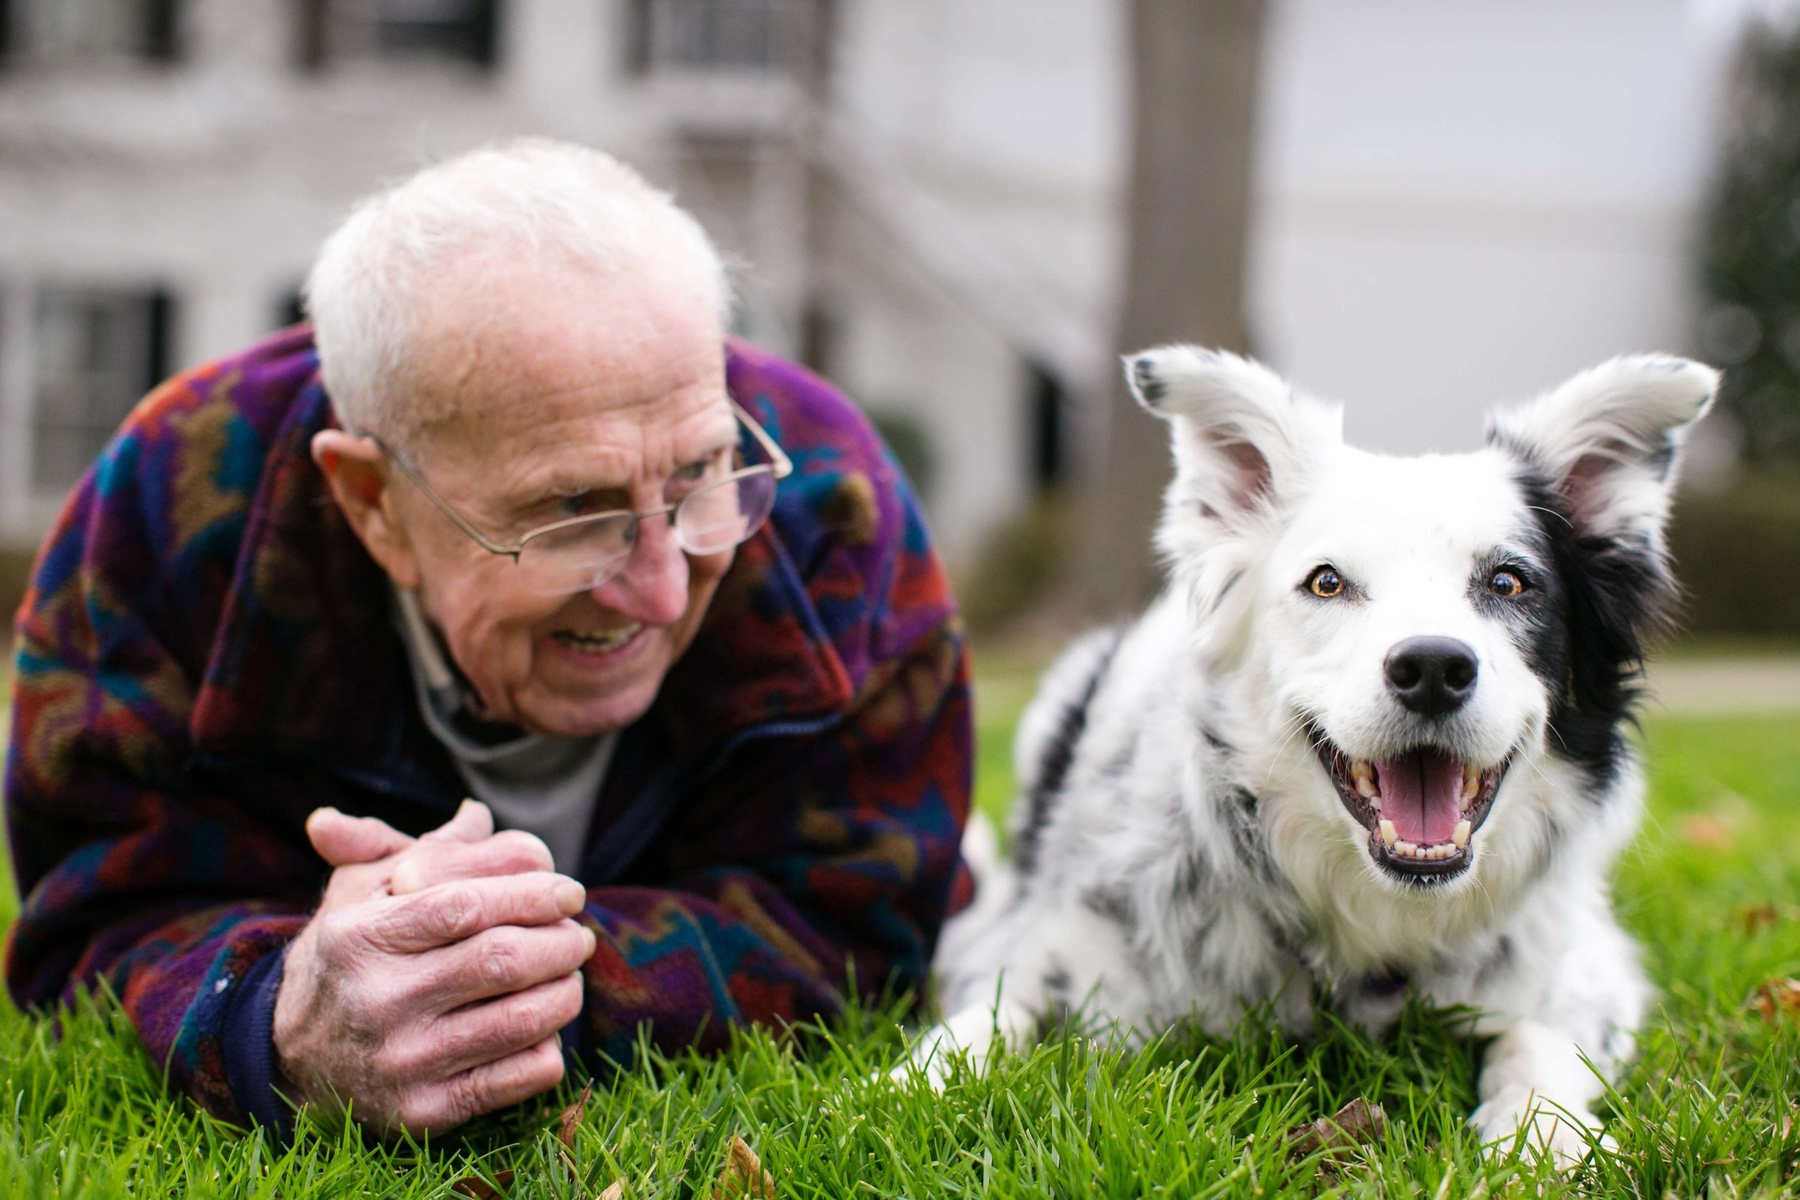 Chaser The Dog and her owner Dr. John Pilley photographed in the front lawn of their home.